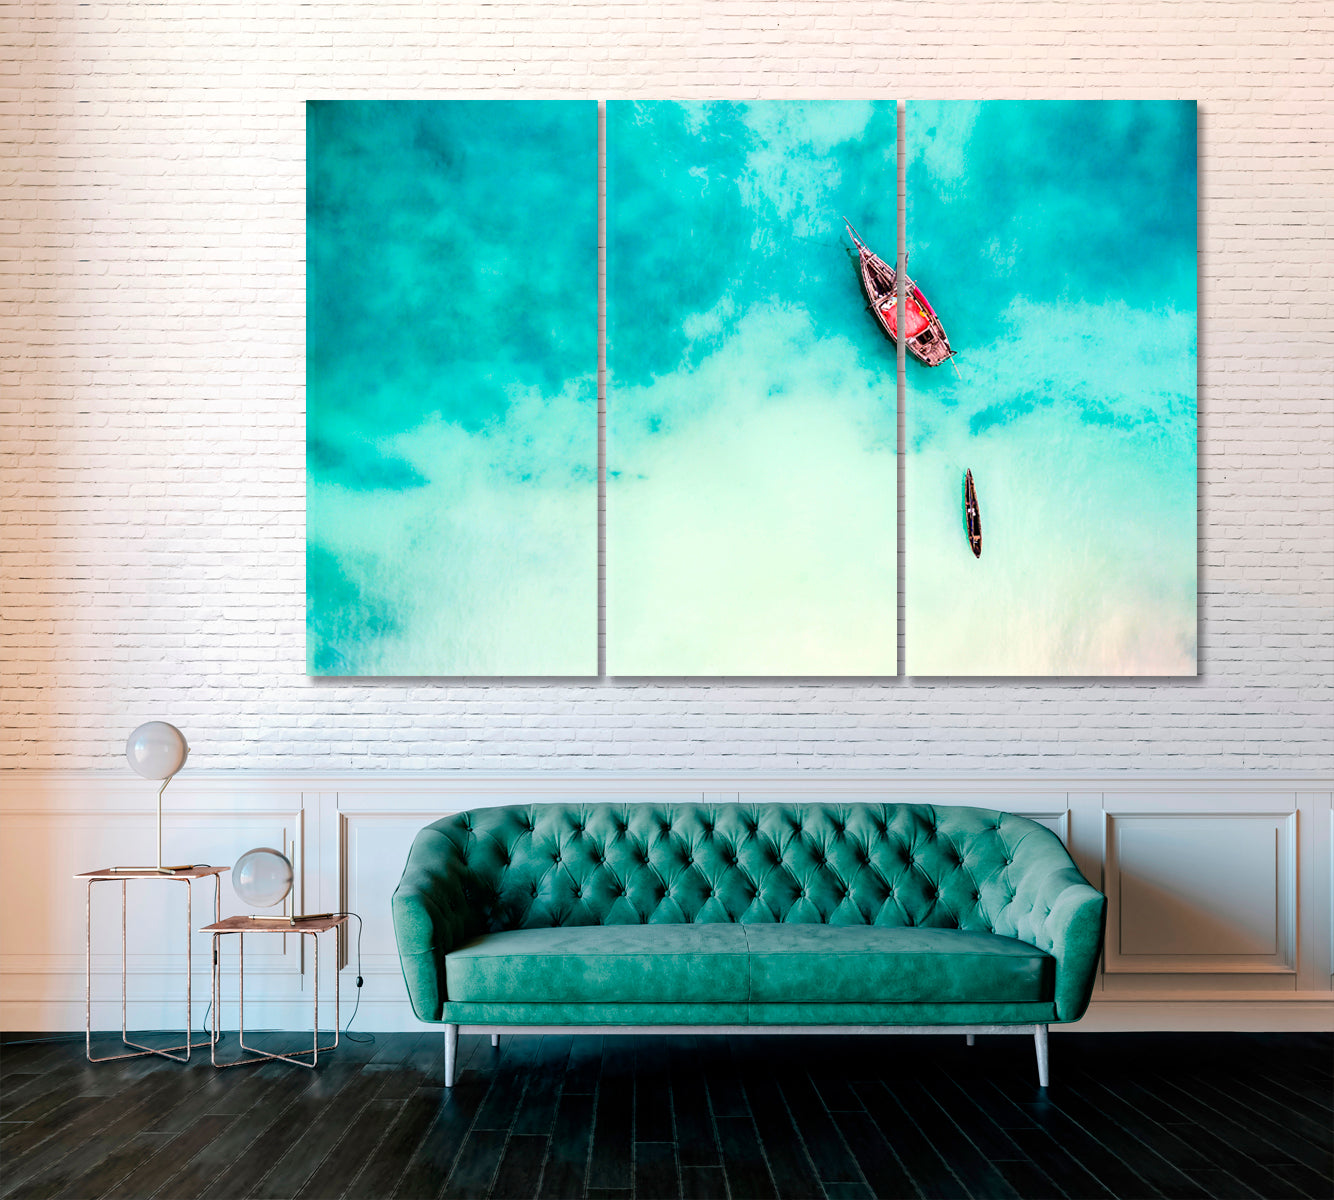 Boat and Ship in Turquoise Ocean Zanzibar Canvas Print ArtLexy 3 Panels 36"x24" inches 